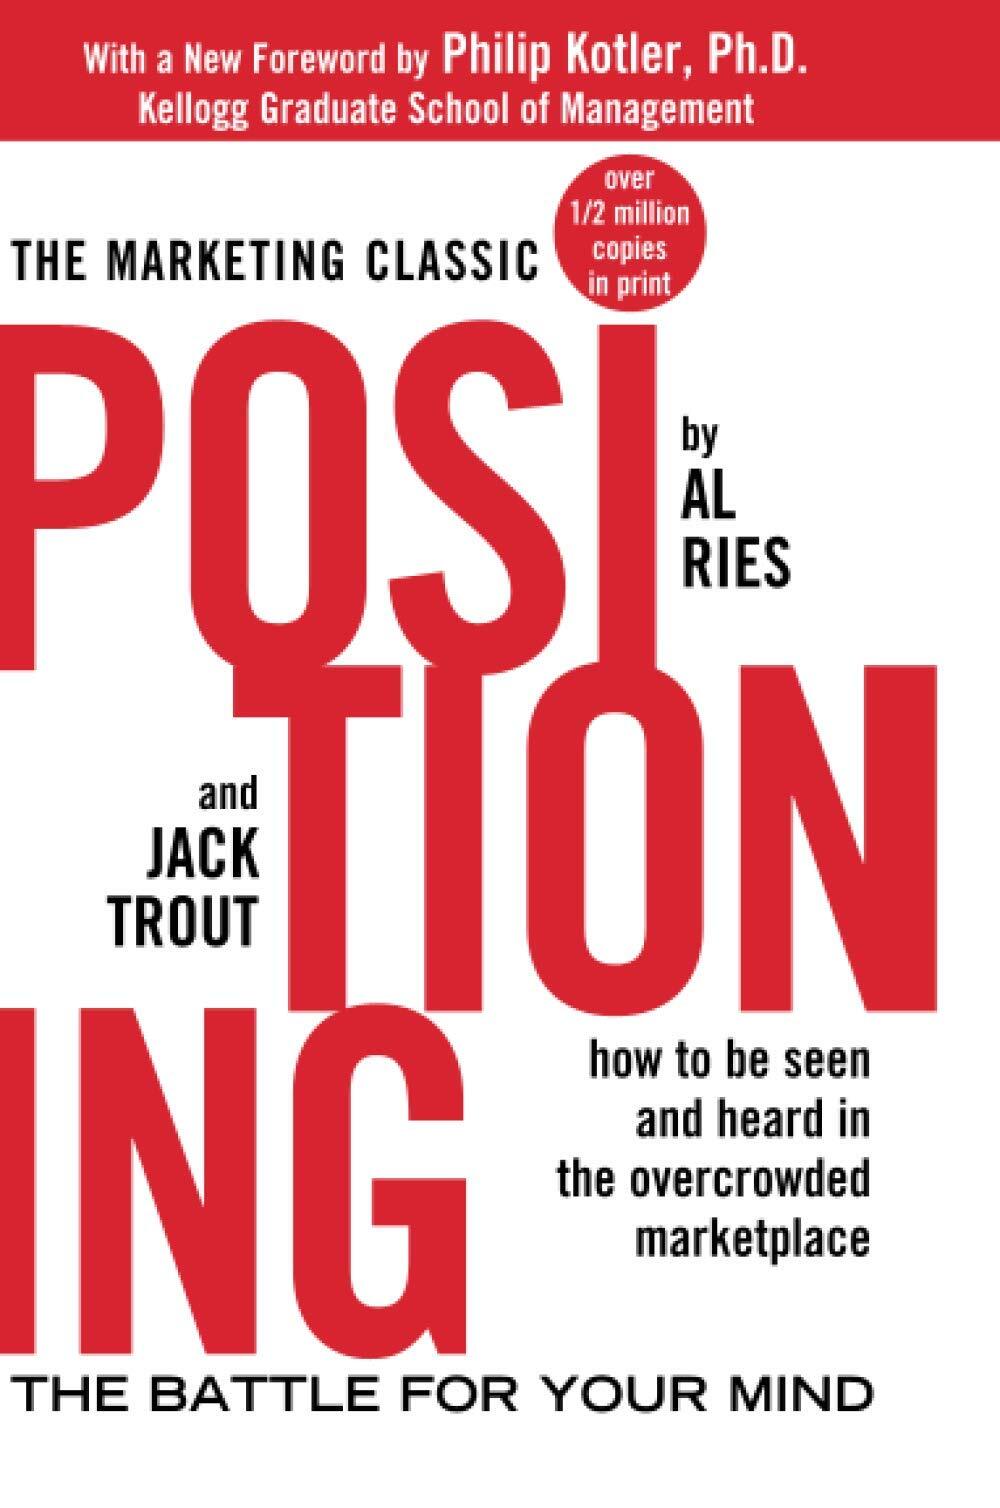  "Positioning: The Battle for Your Mind" by Al Ries and Jack Trout